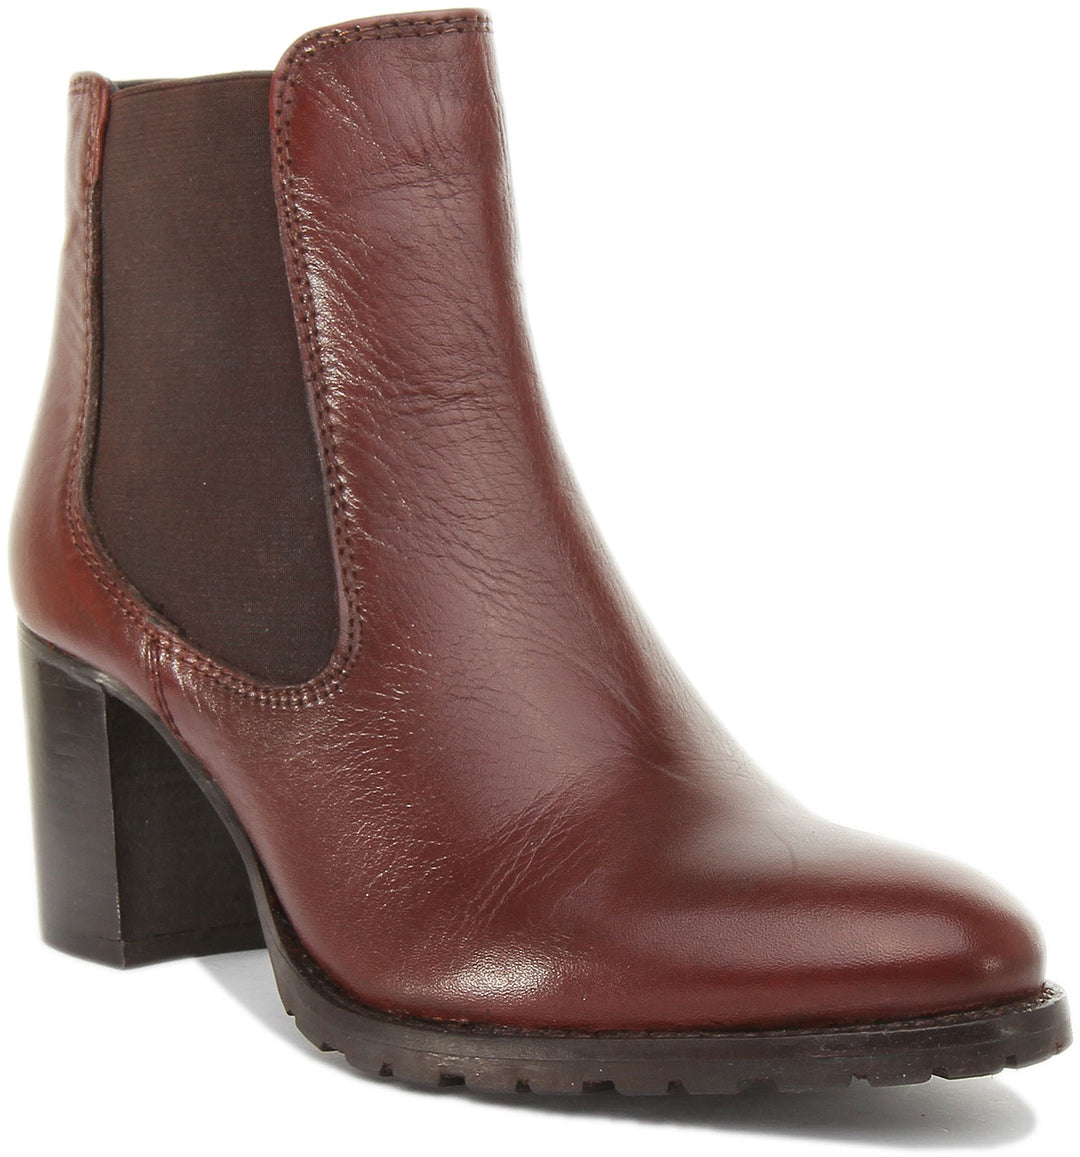 JUSTINREESS ENGLAND Womens Ankle Boots JUSTINREESS ENGLAND Julia In Dark Brown